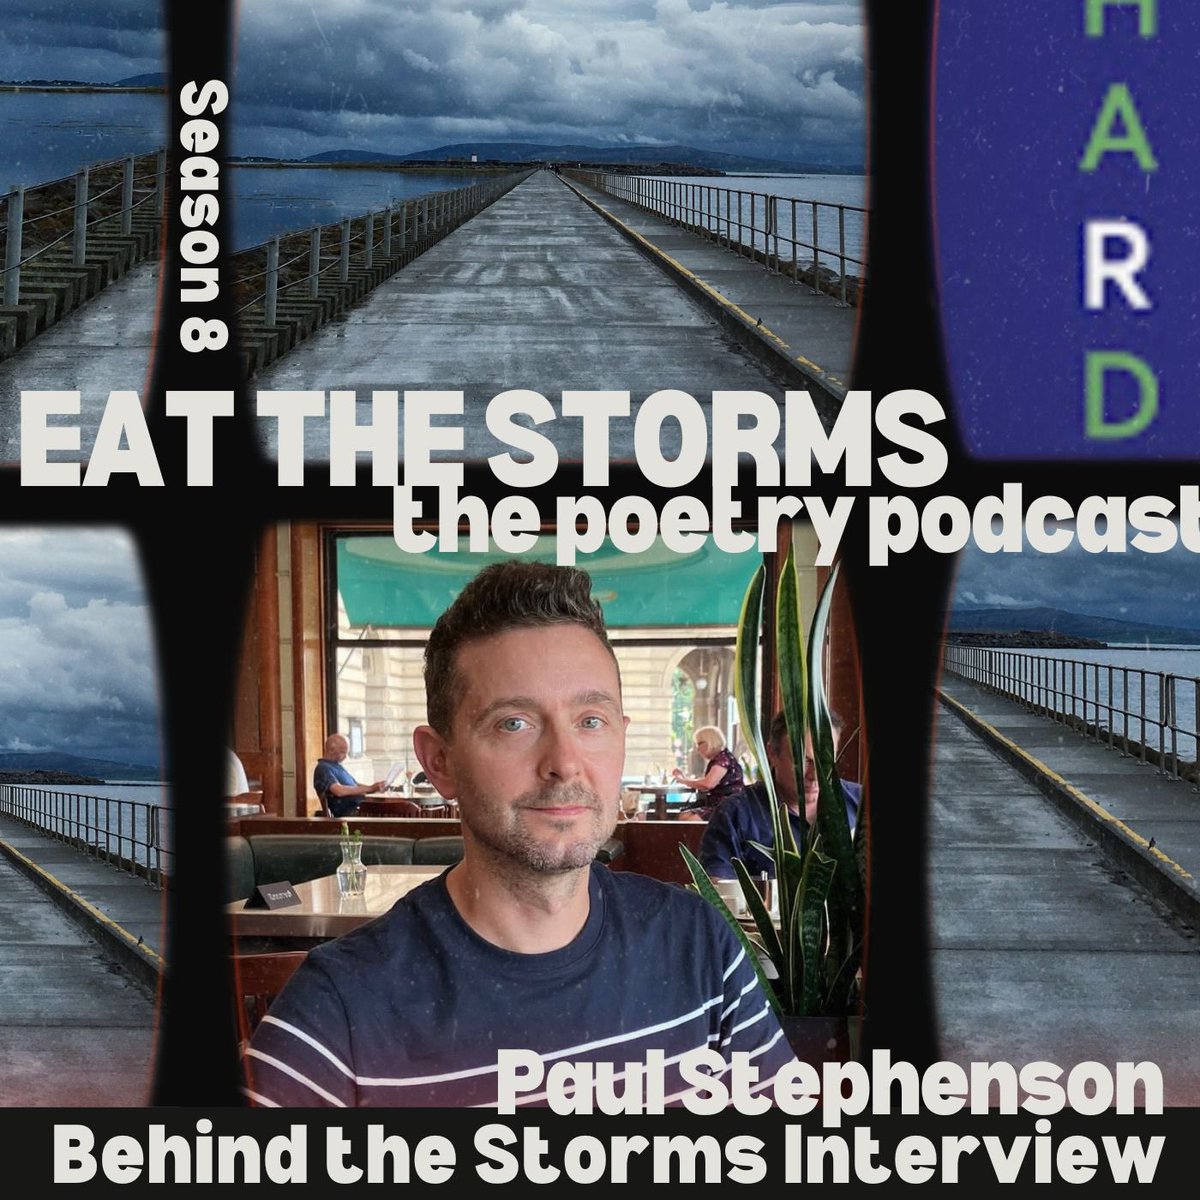 Today from 5pm tune into the #poetry #podcast (though it’s a podcast so feel free to tune in whenever you like) My guests will be @briankirkwriter @kmeehan @captainiberia & @stephenson_pj joins for a chat as part of Behind the Storms Ensure your weekend Stays bloody poetic 💙